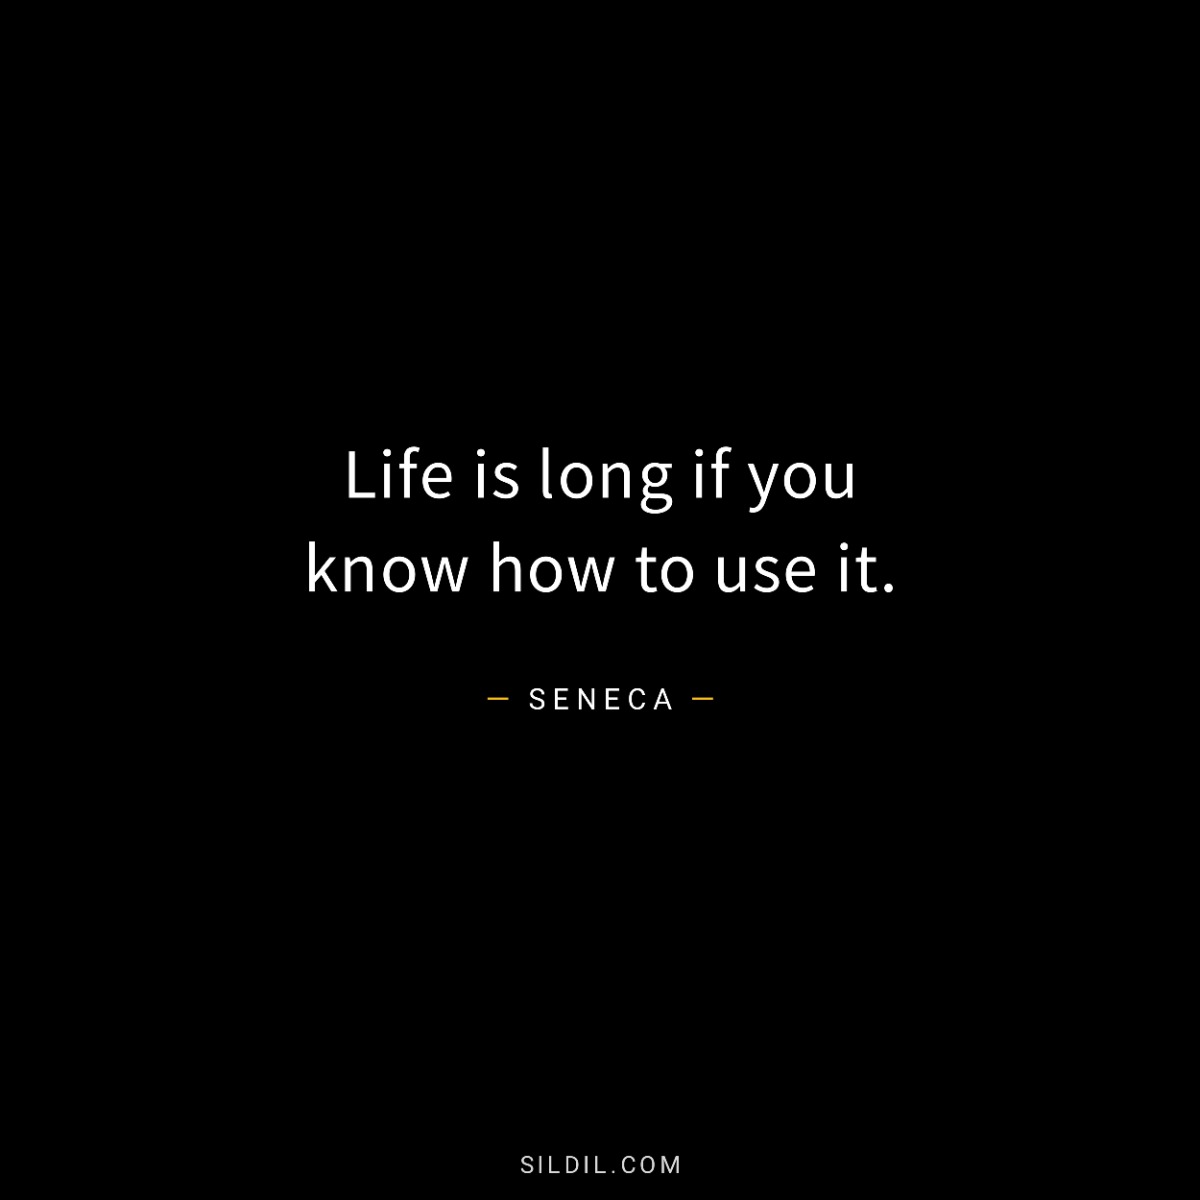 Life is long if you know how to use it.